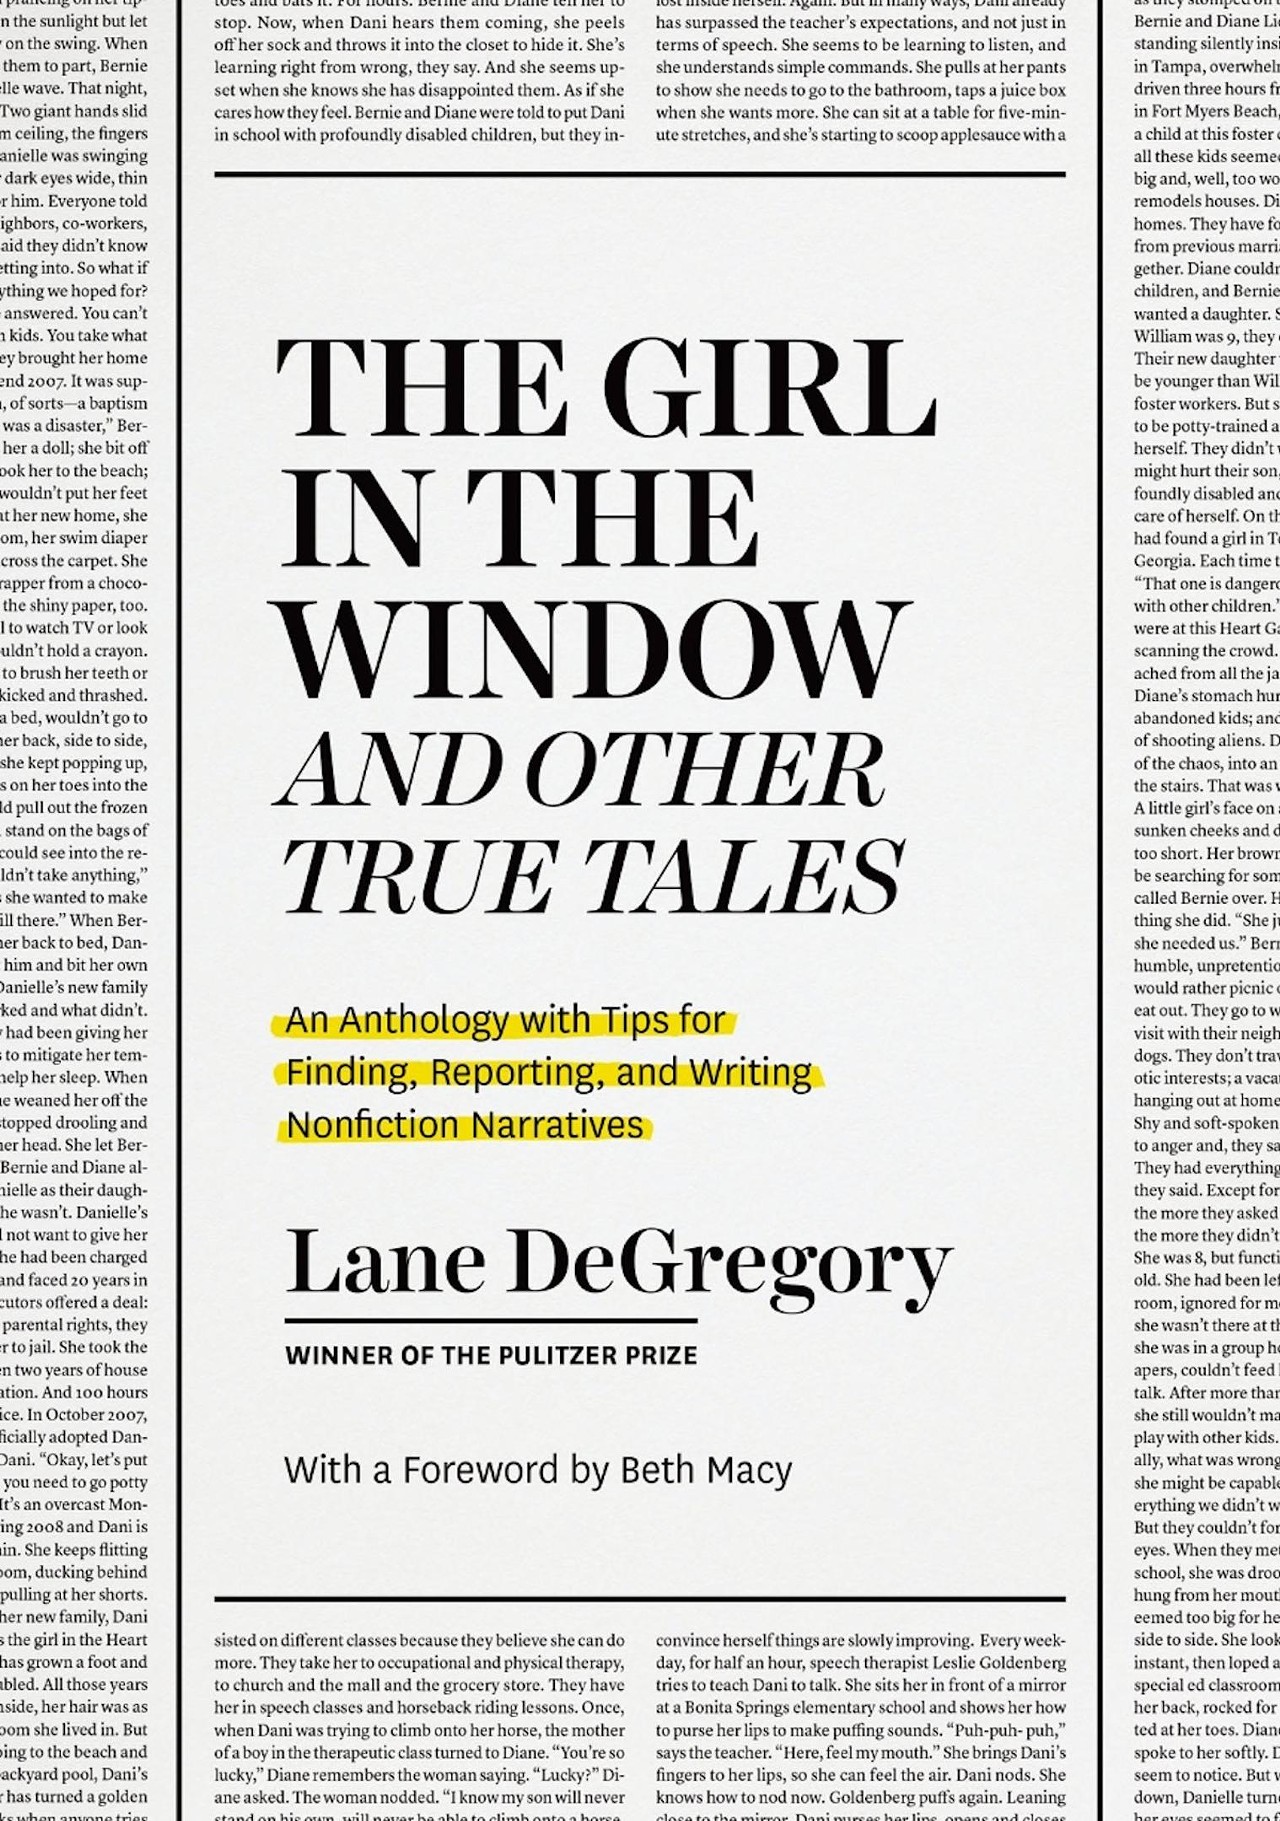 ‘The Girl in the Window and Other True Tales: An anthology with Tips for Finding, Reporting, and Writing Nonfiction Narrative’ By Lane DeGregory
The Pulitzer Prize-winning journalist shares behind-the-scenes details about some of her most famous stories—how she found and built them, showcasing her process and providing essential tips for journalists and nonfiction writers. This book is a craft guide and “forensic reading” of DeGregory’s work and perfect for those who want to improve their writing and just appreciate a good true story. (University of Chicago Press)
Photo via University of Chicago Press